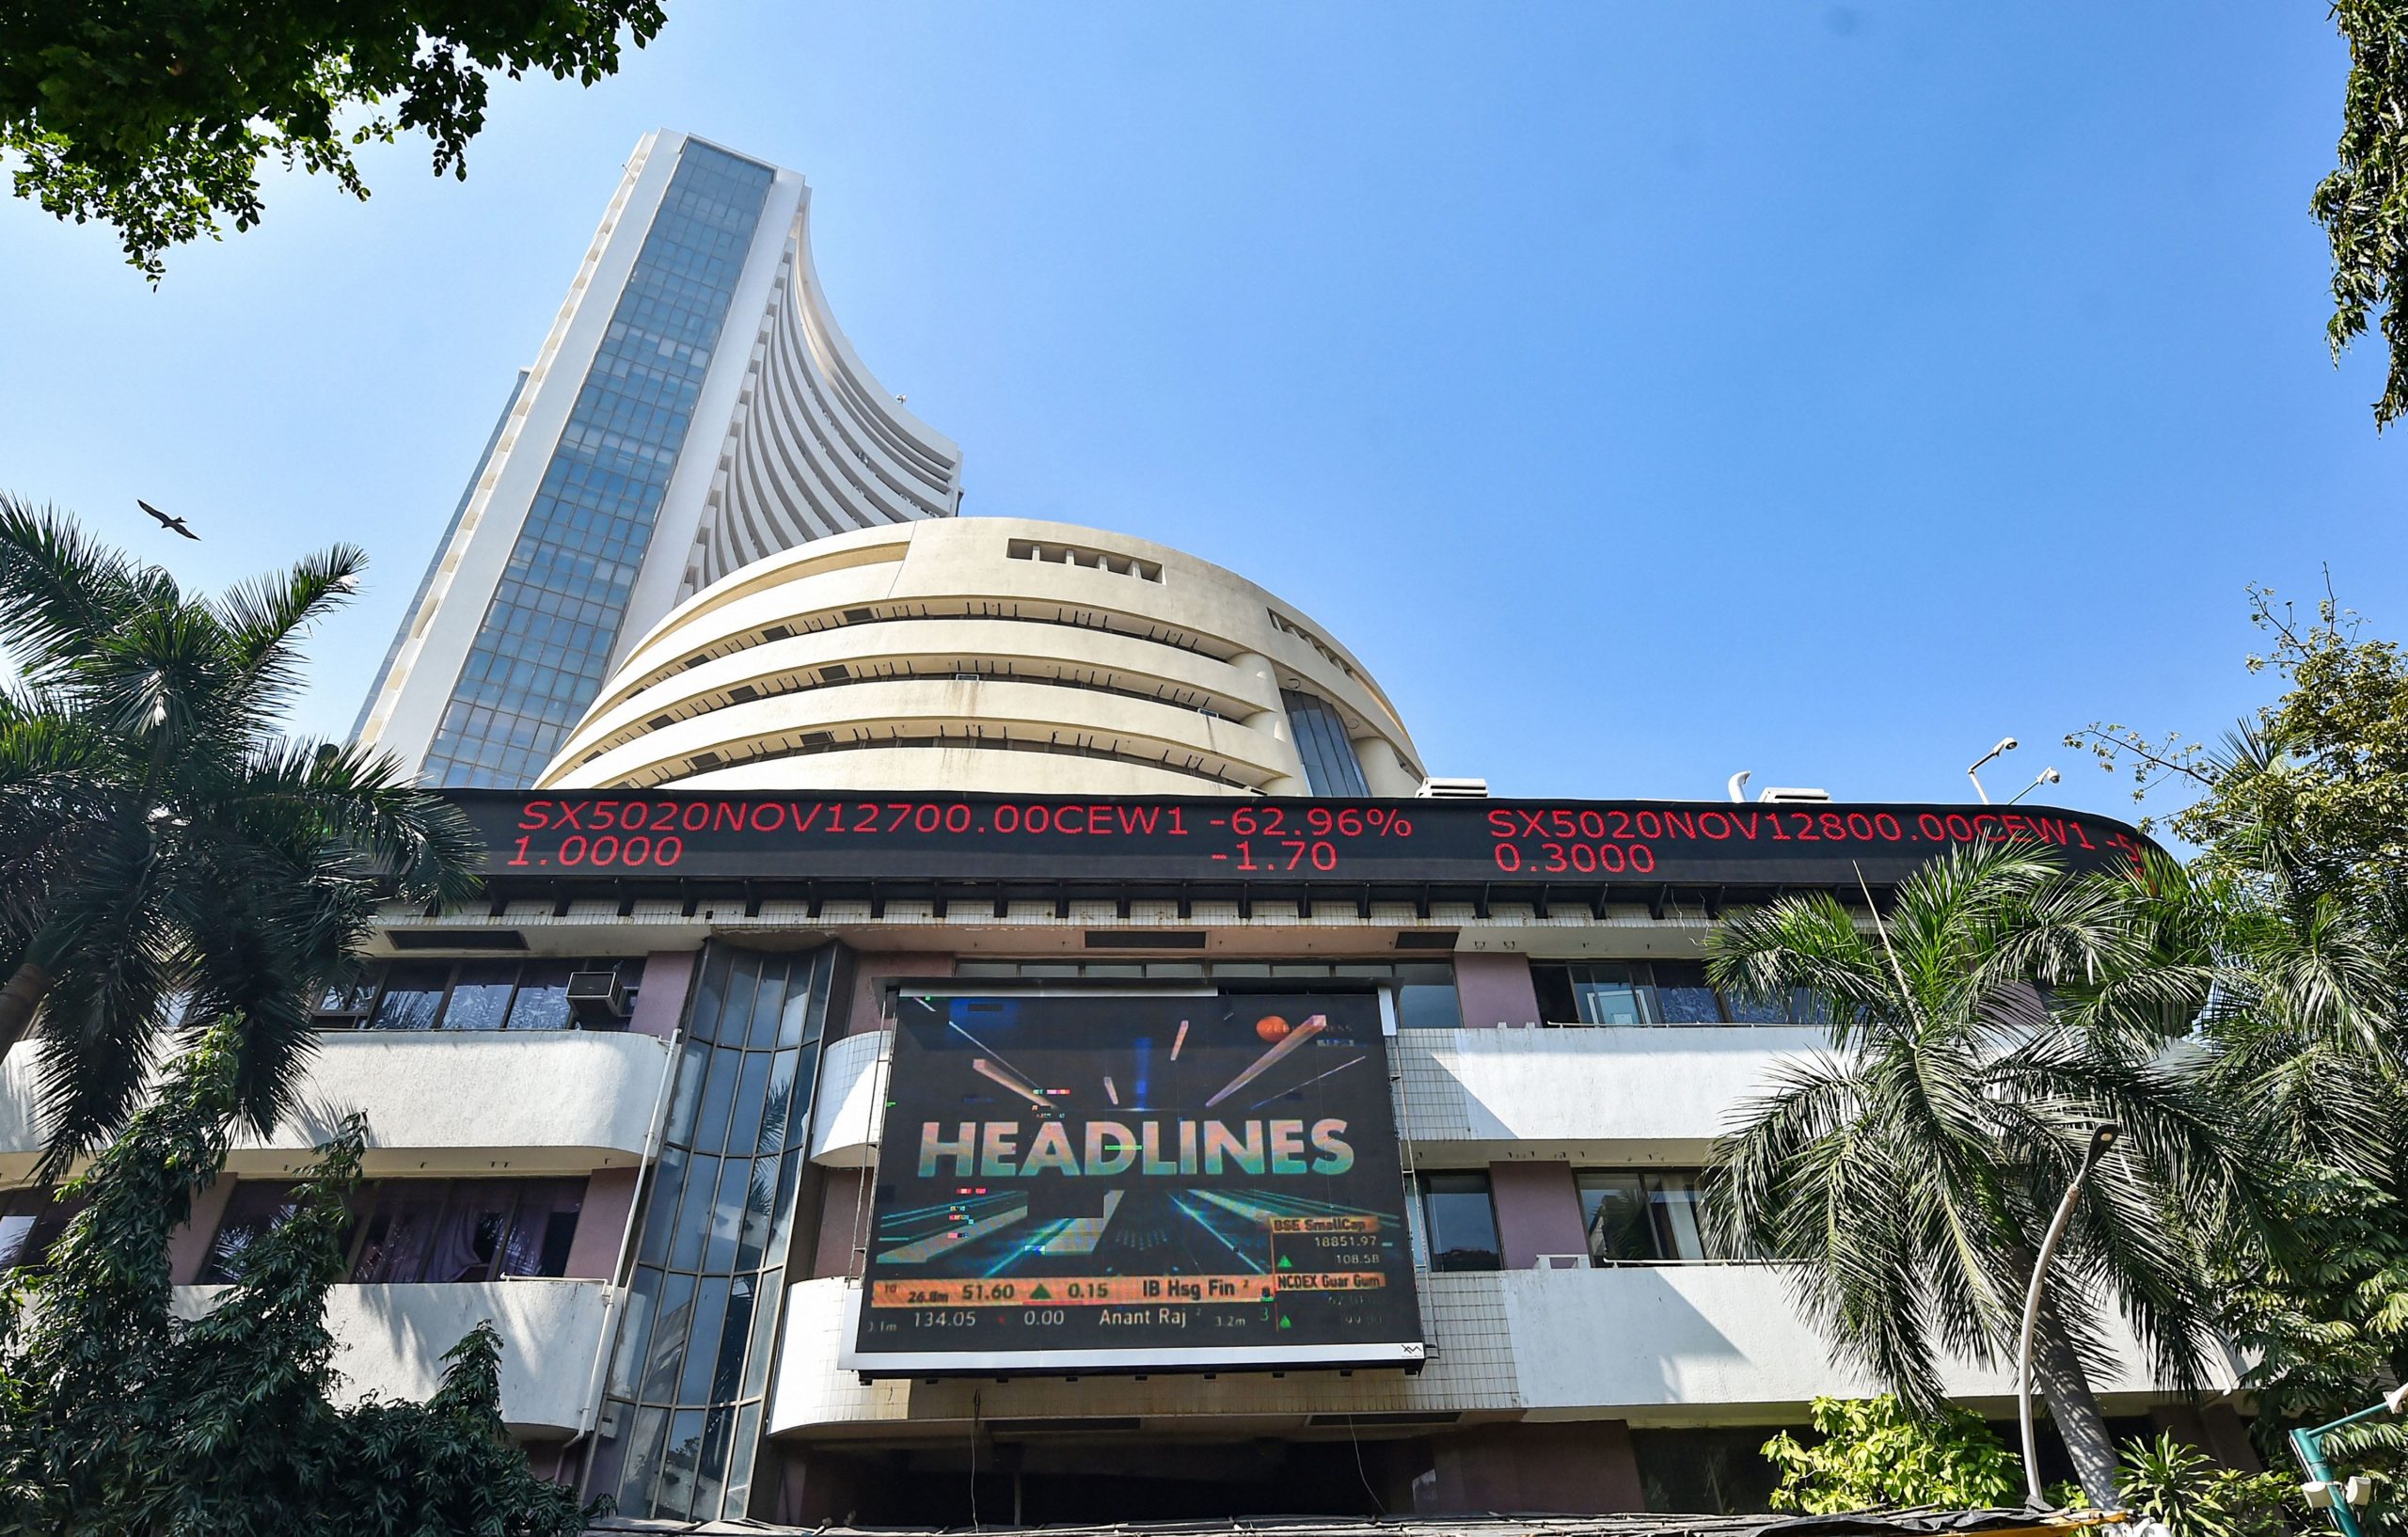 Trending Stocks: Vodafone Idea, Reliance, ONGC and others in news today